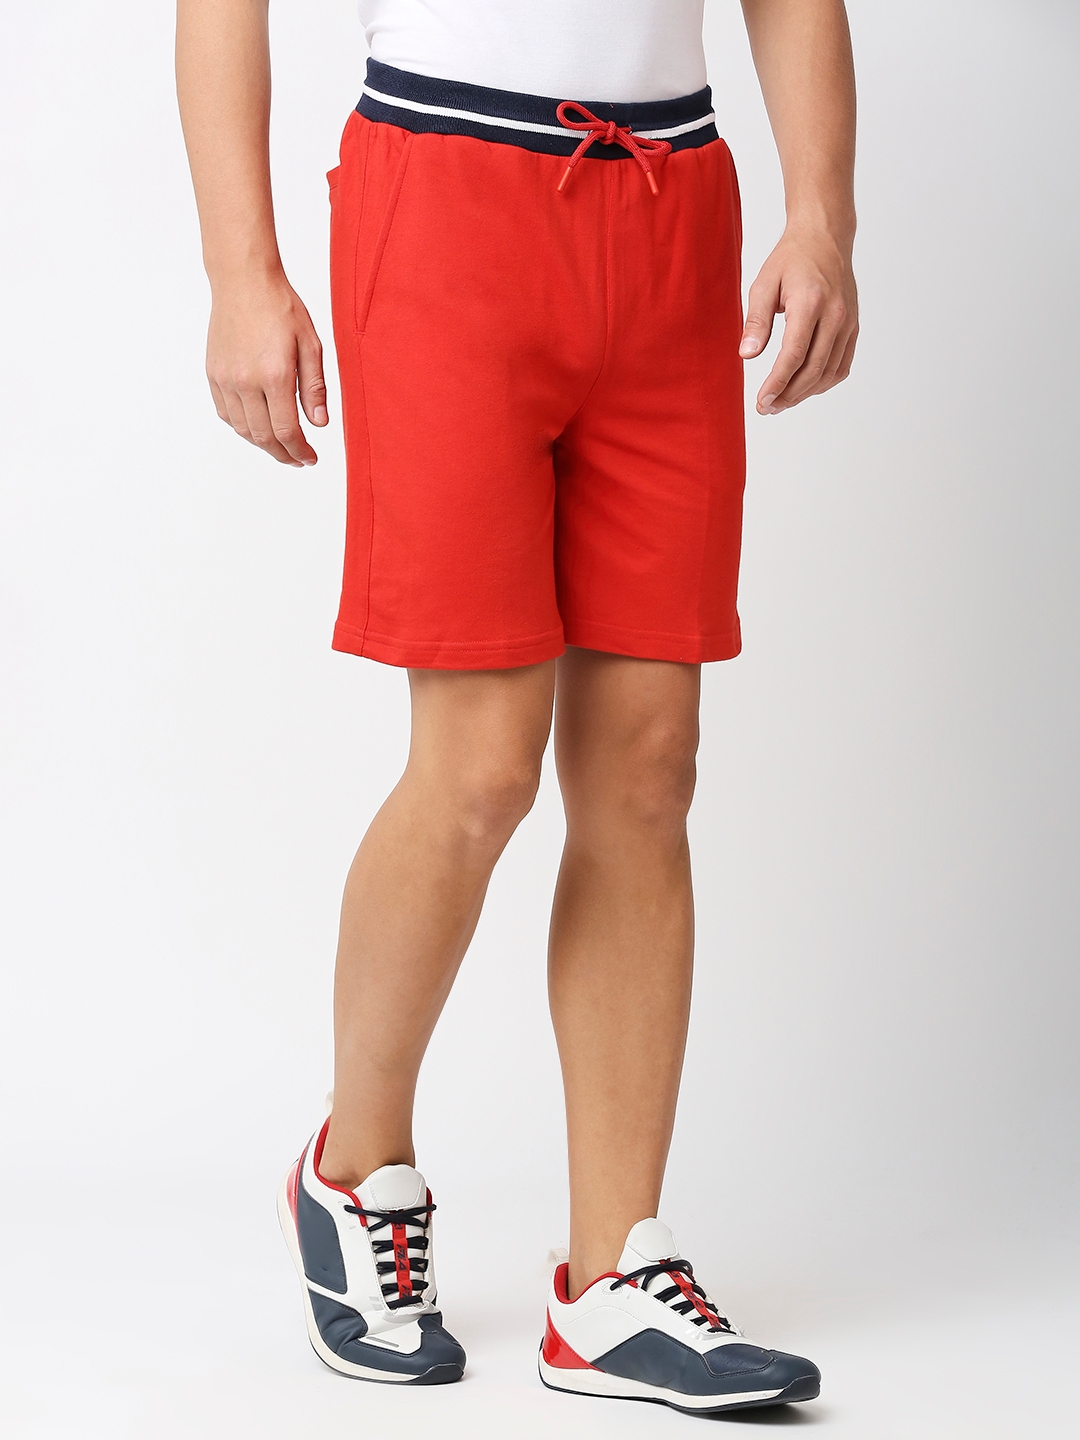 Men's  Slim Fit Cotton Red Shorts